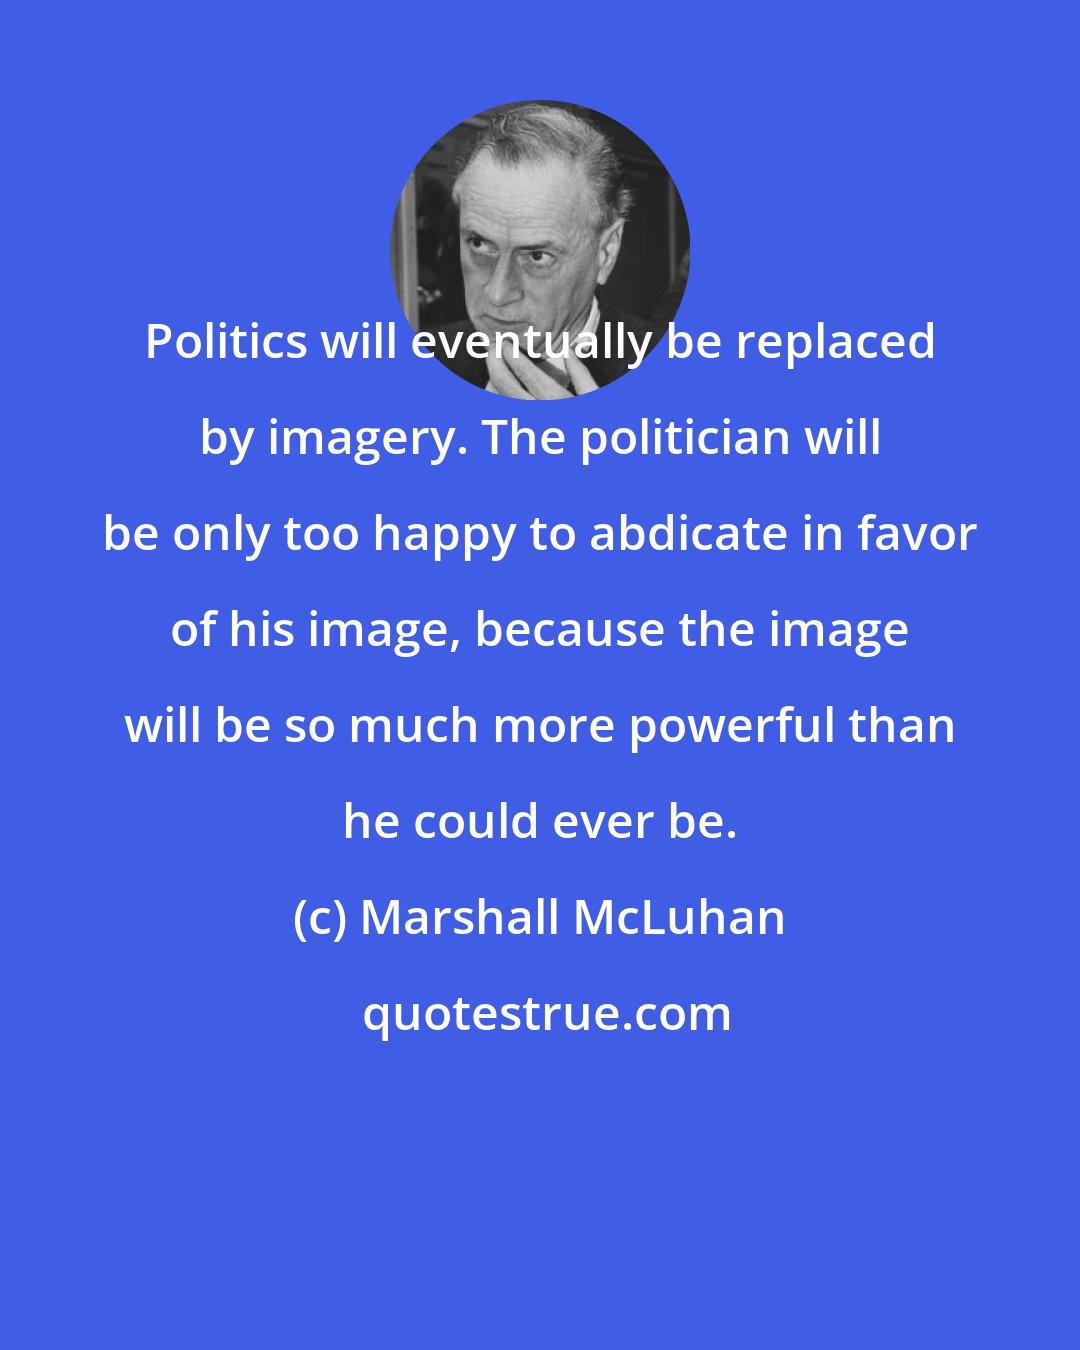 Marshall McLuhan: Politics will eventually be replaced by imagery. The politician will be only too happy to abdicate in favor of his image, because the image will be so much more powerful than he could ever be.